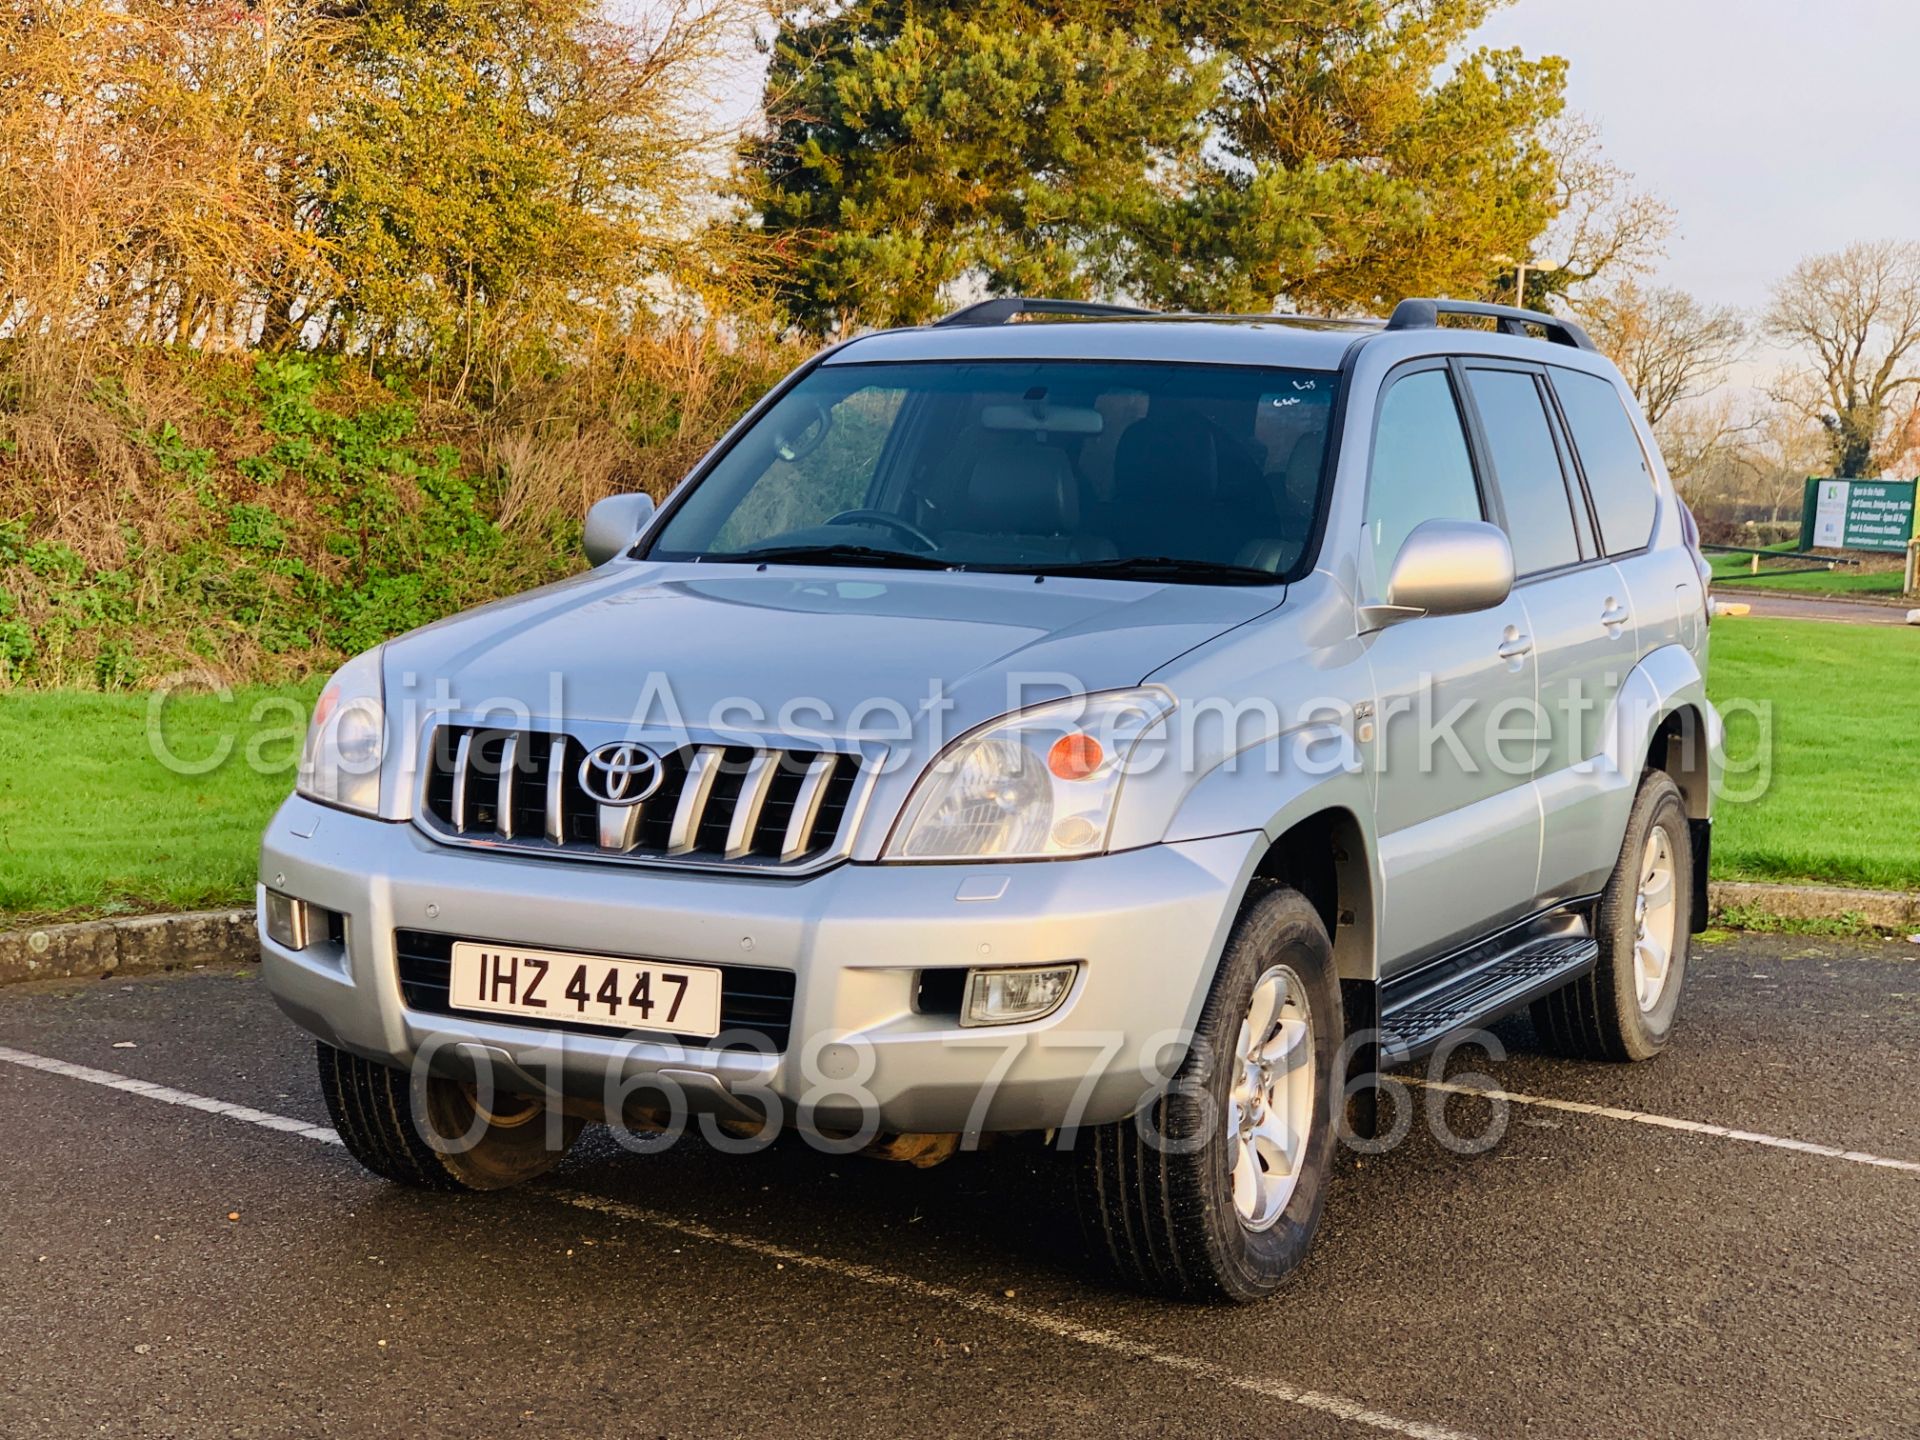 (On Sale) TOYOTA LAND CRUISER *INVINCIBLE* 7 SEATER SUV (2006) '3.0 D-4D - AUTO' *TOP SPEC* (NO VAT) - Image 5 of 50